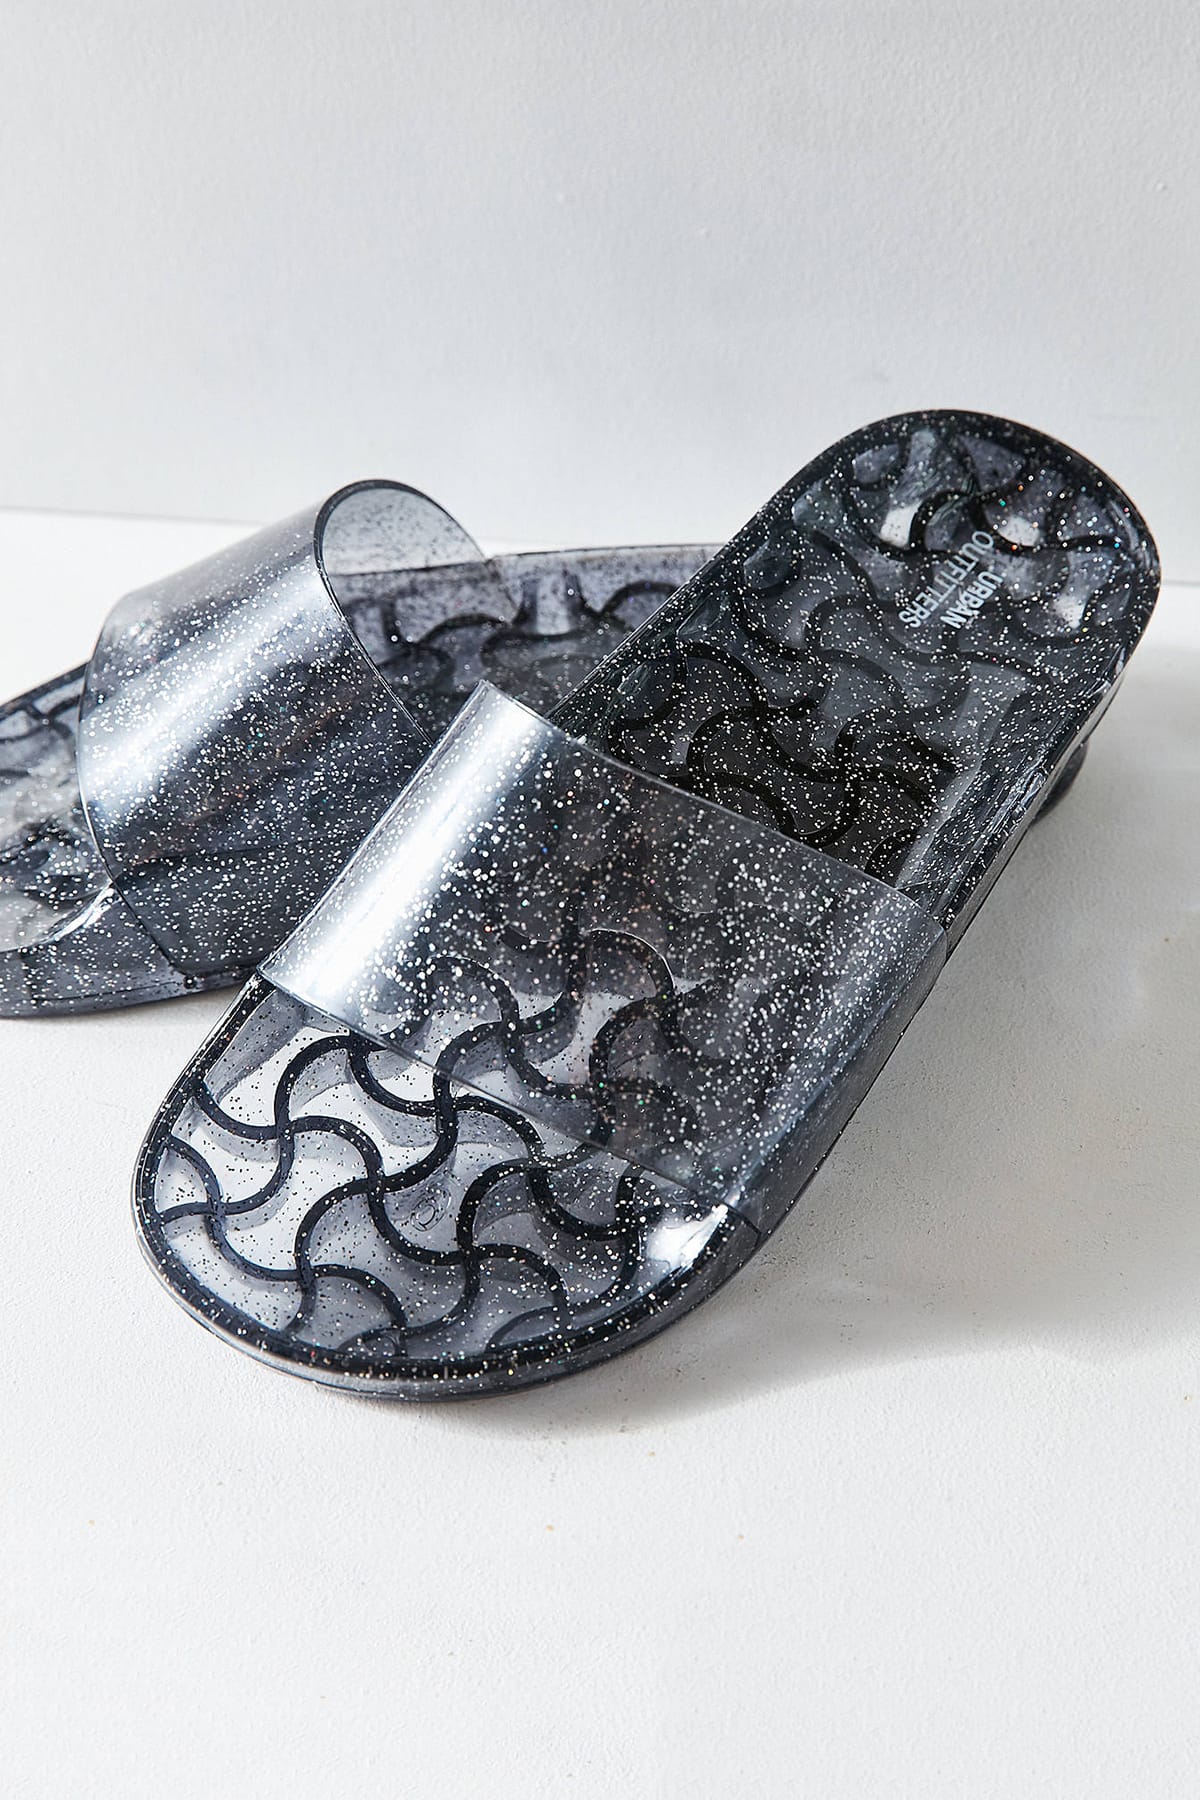 urban outfitters jelly slides